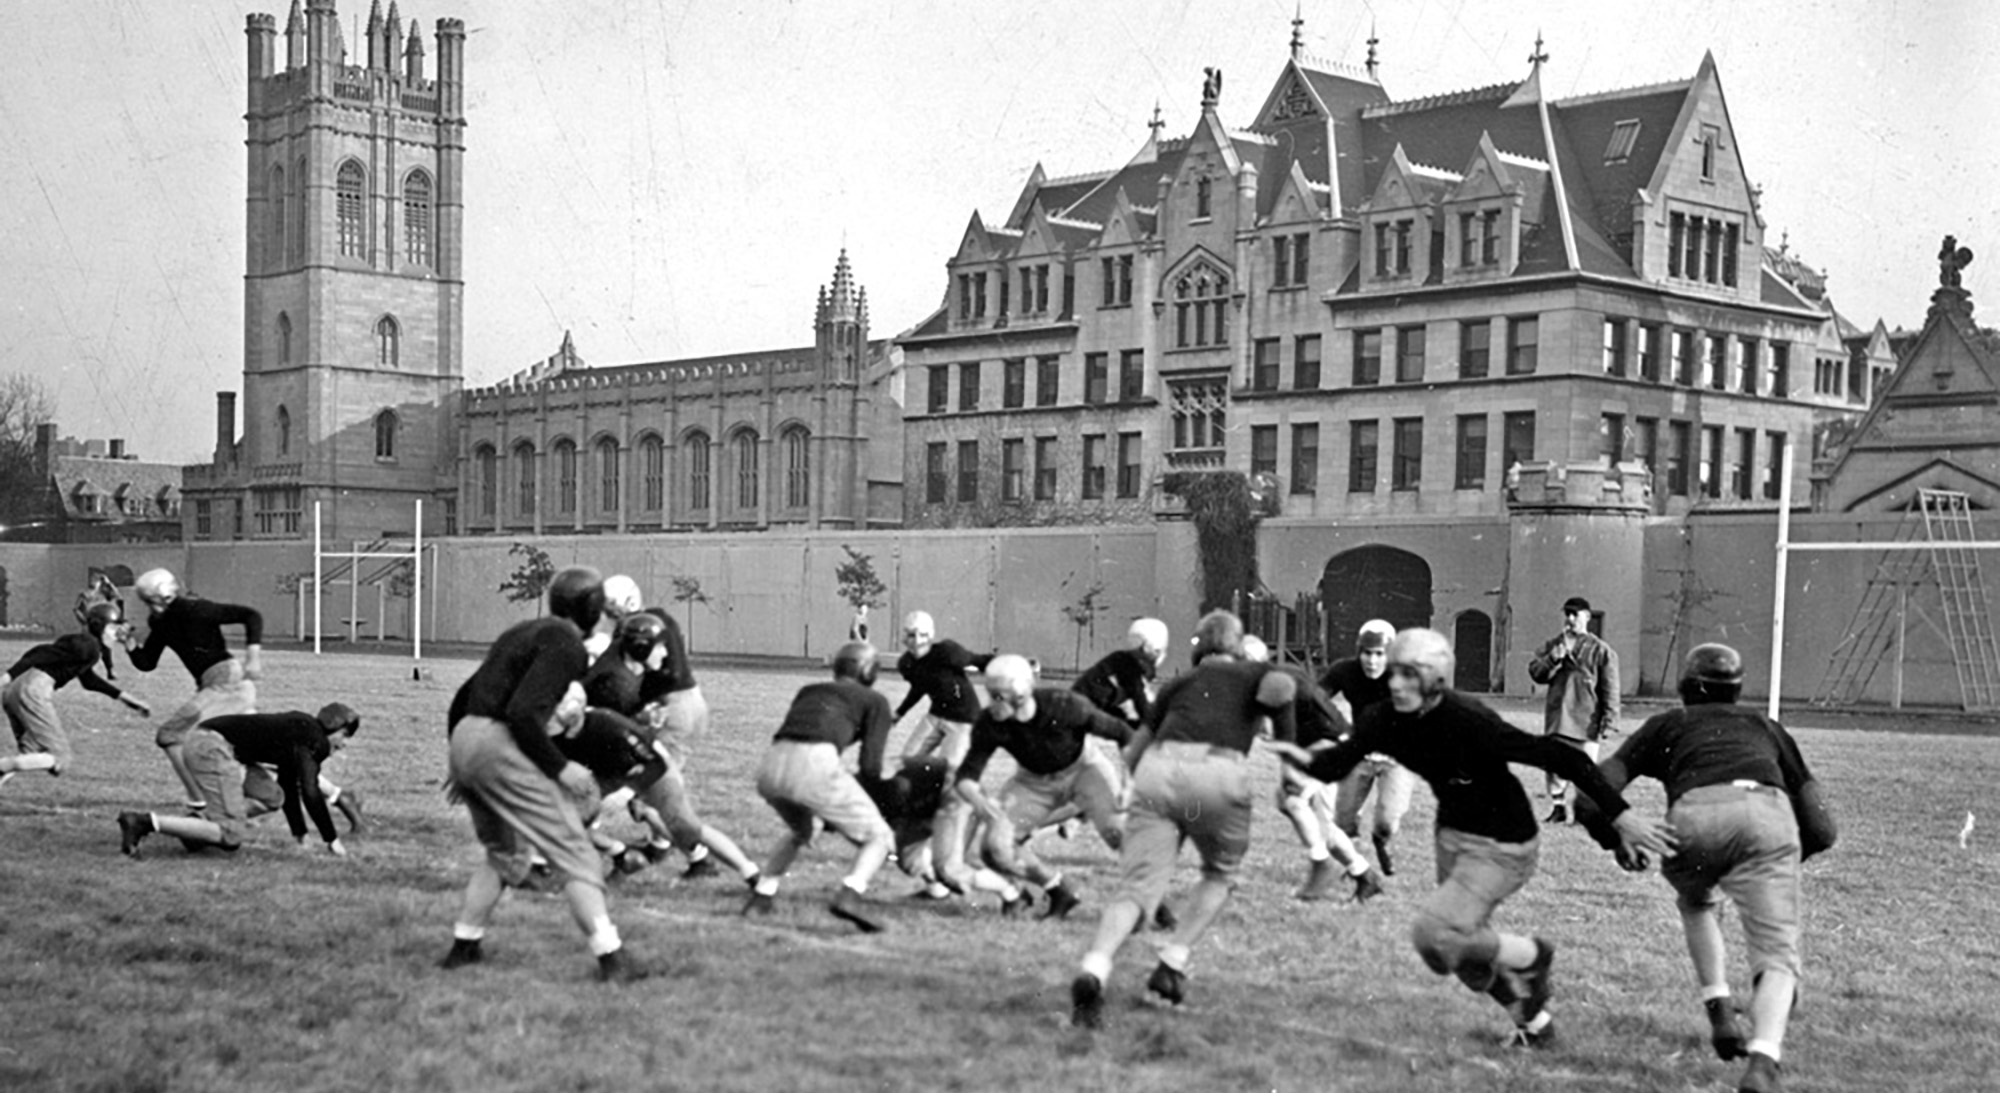 1947 Intramural football game at the University of Chicago